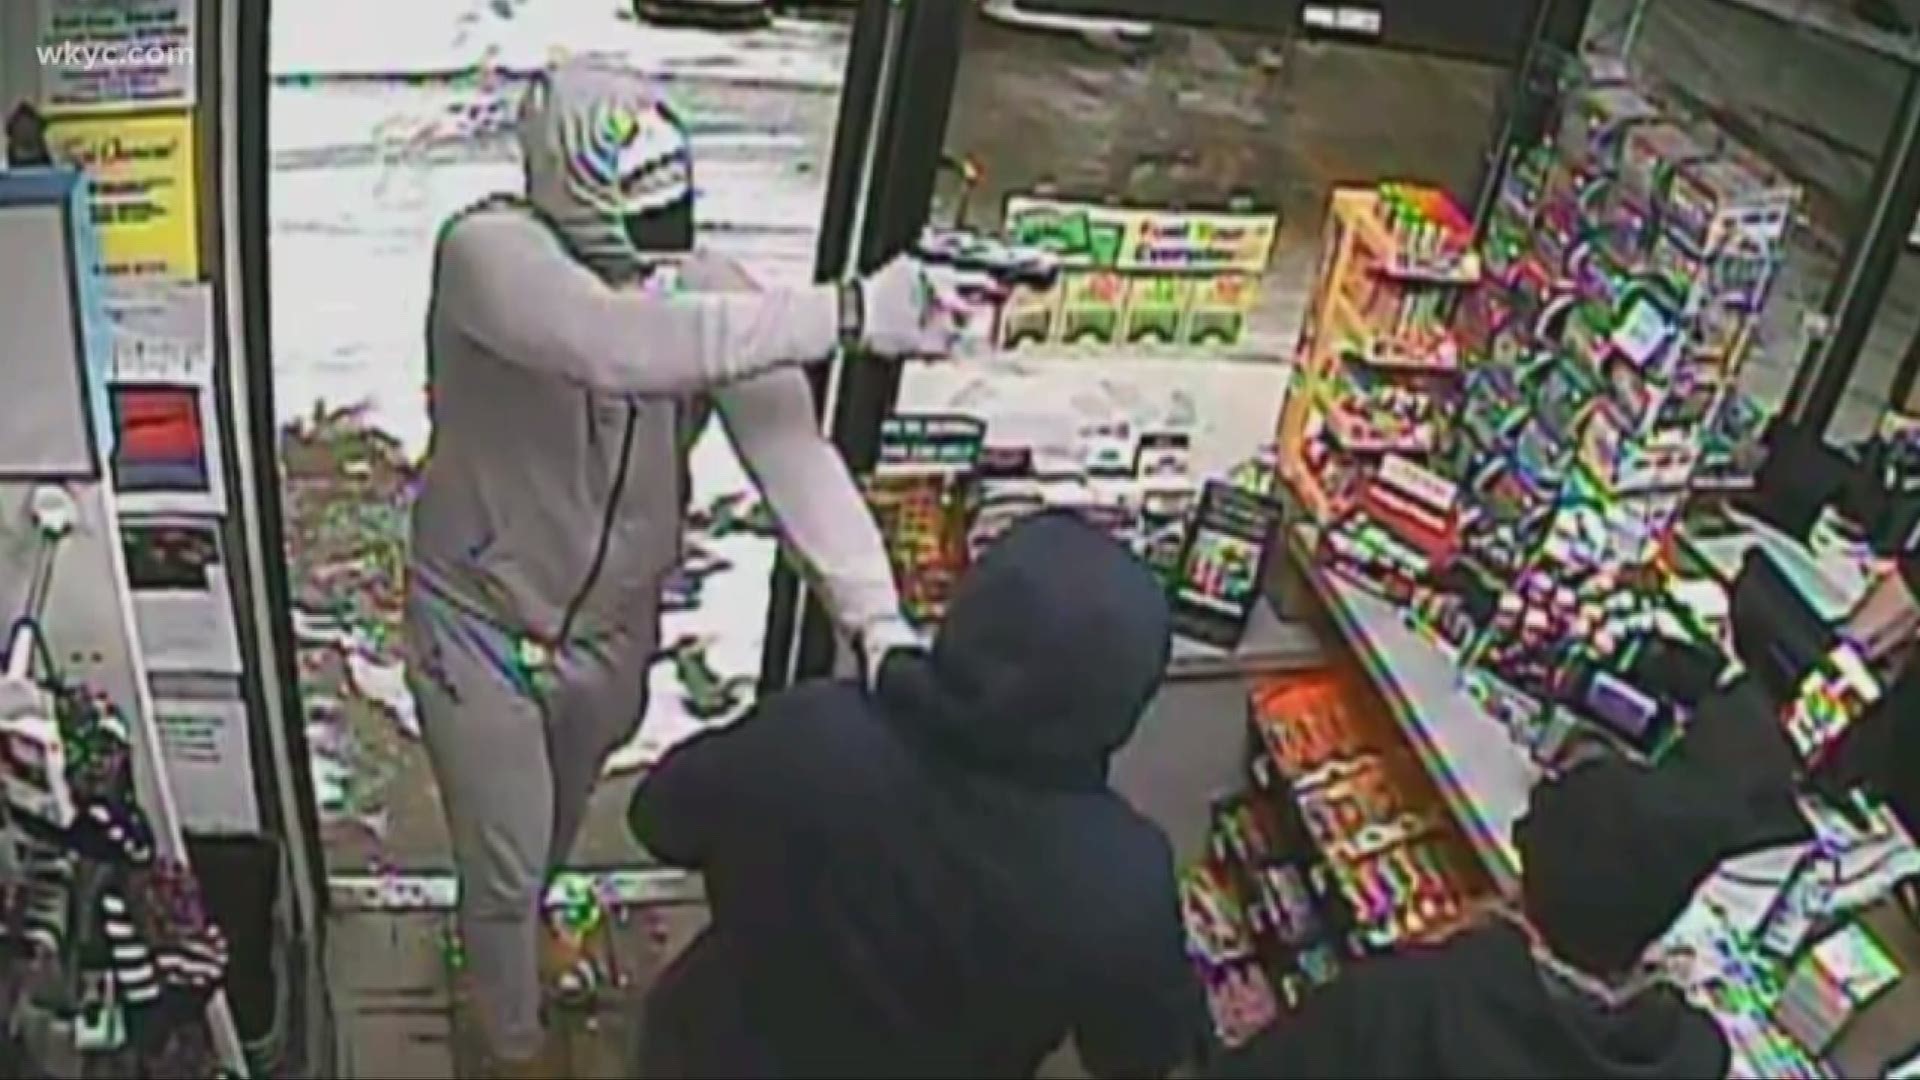 The suspect was wanted in multiple armed robberies at gas stations and dollar stores in the area. Andrew Horansky reports.